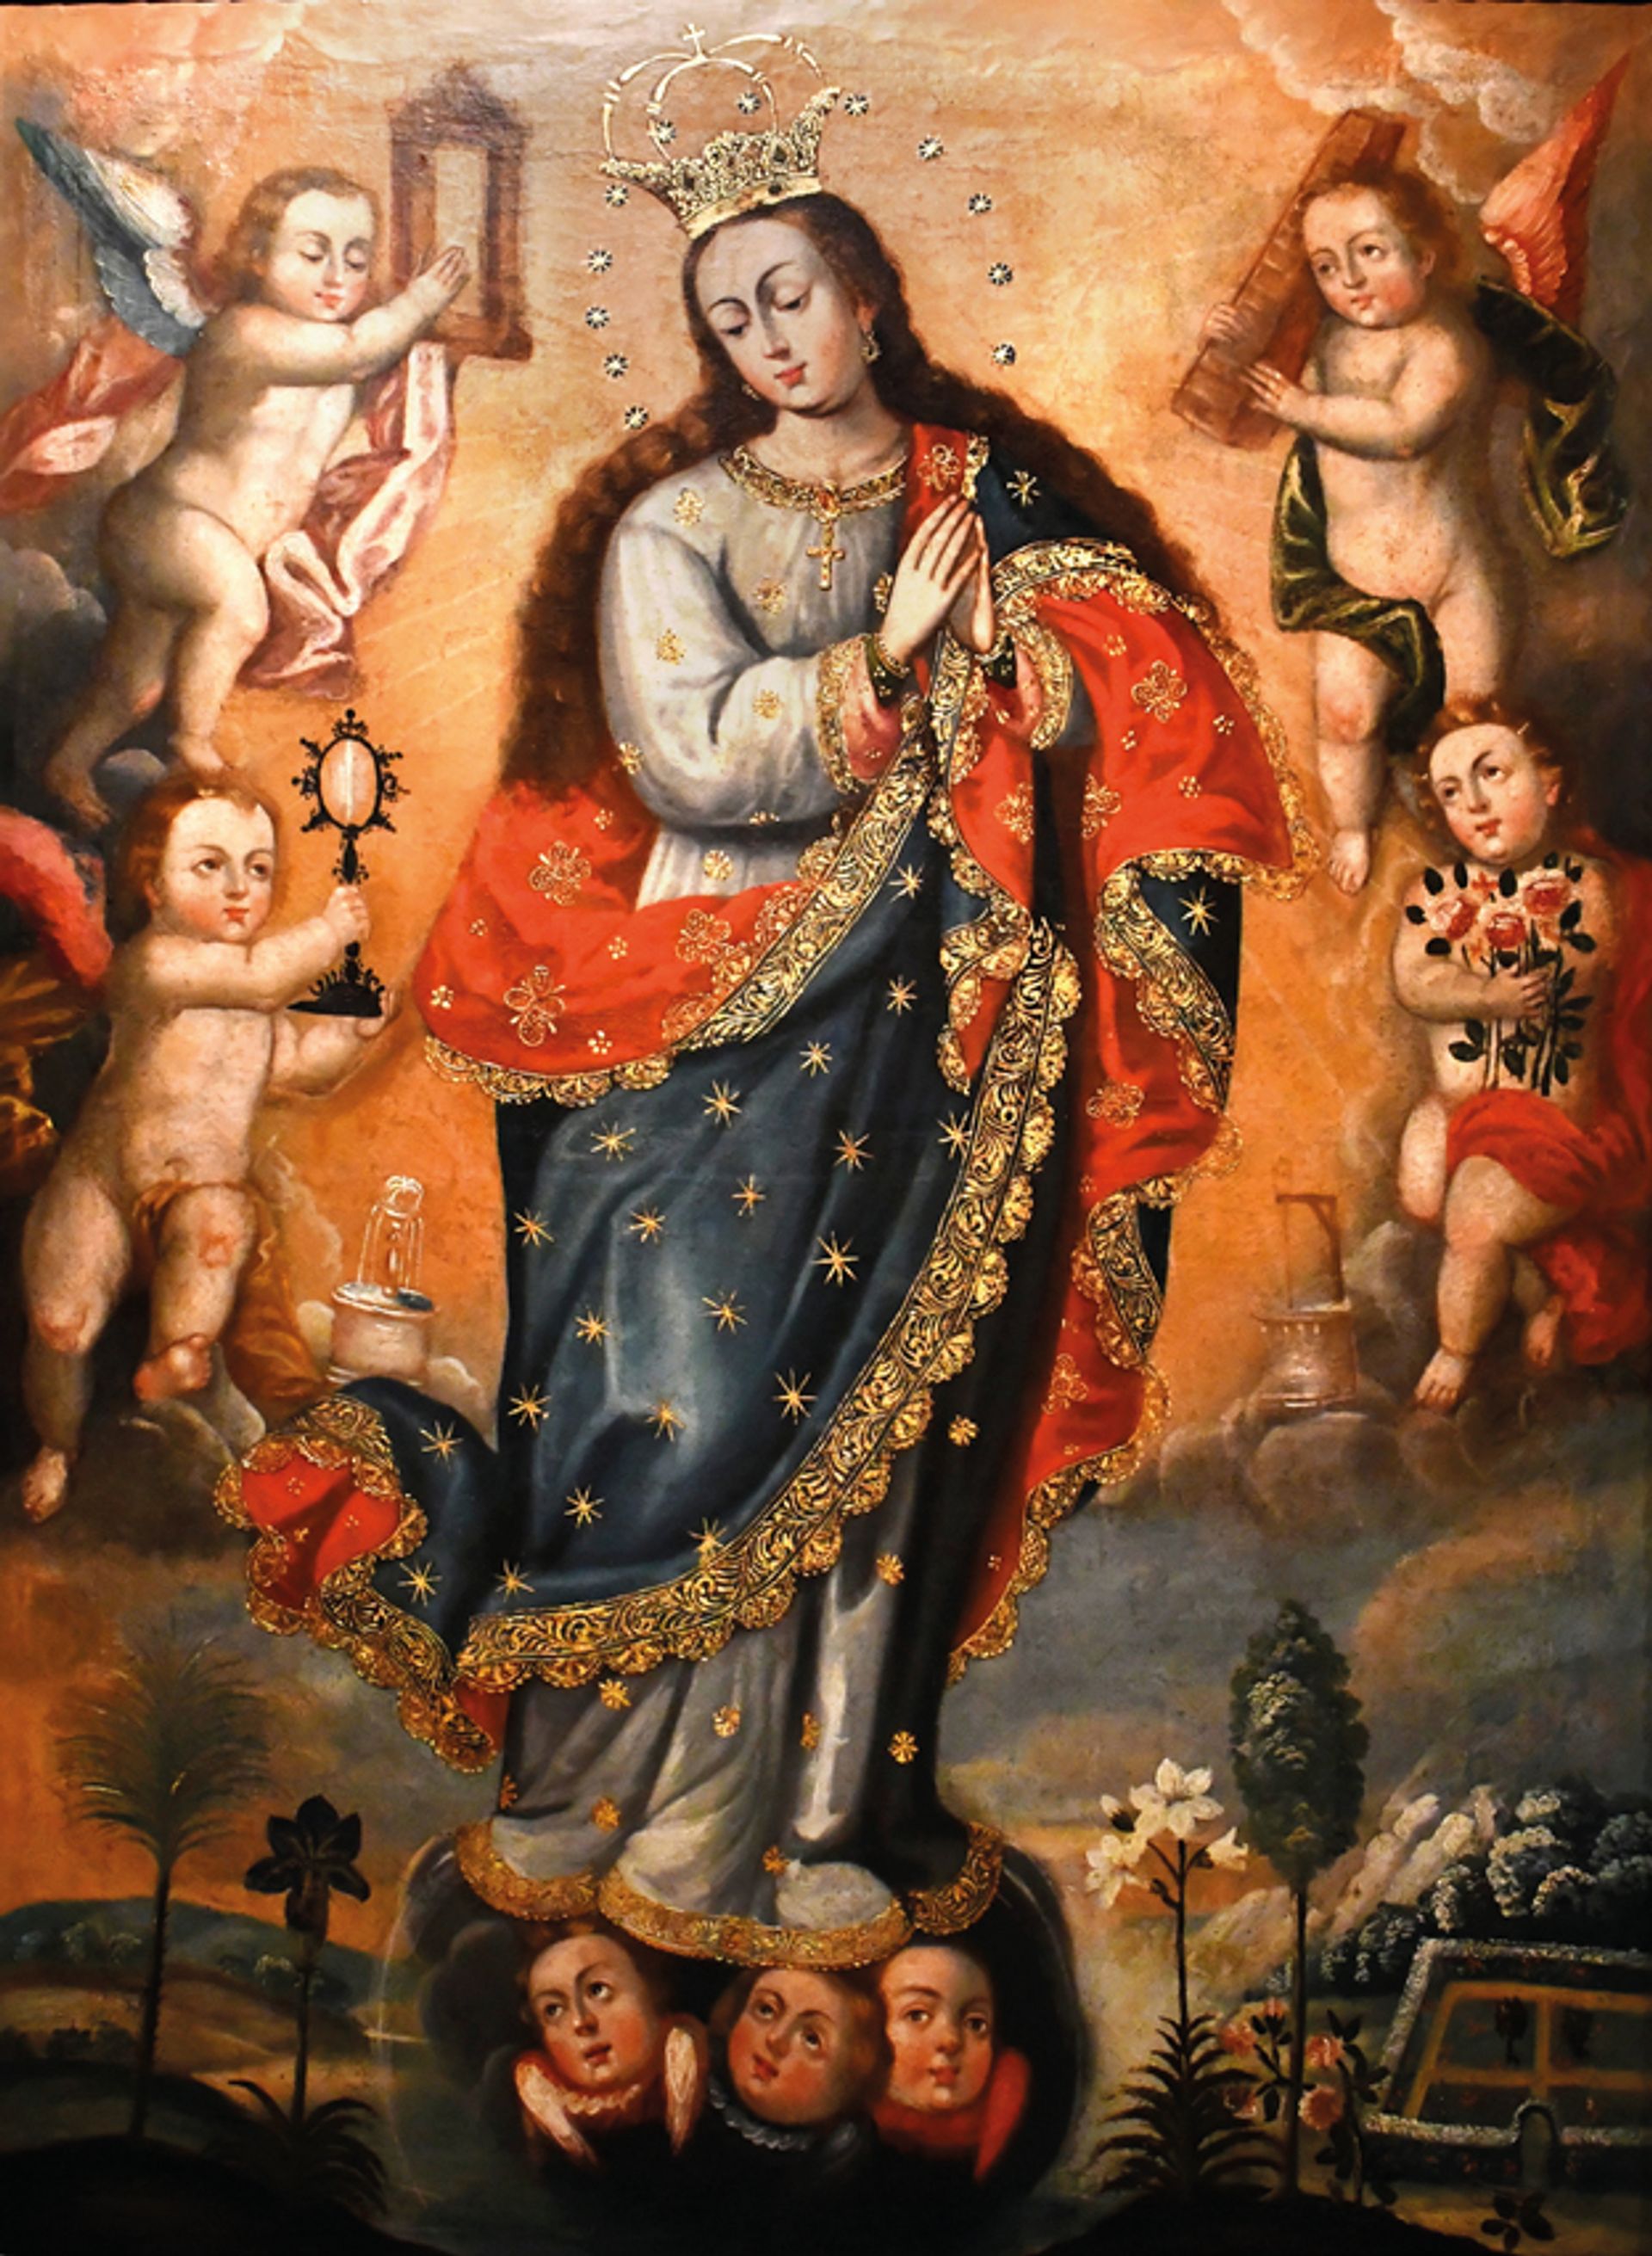 The museum’s collection includes The Immaculate Conception, an anonymous 17th-century Peruvian work 